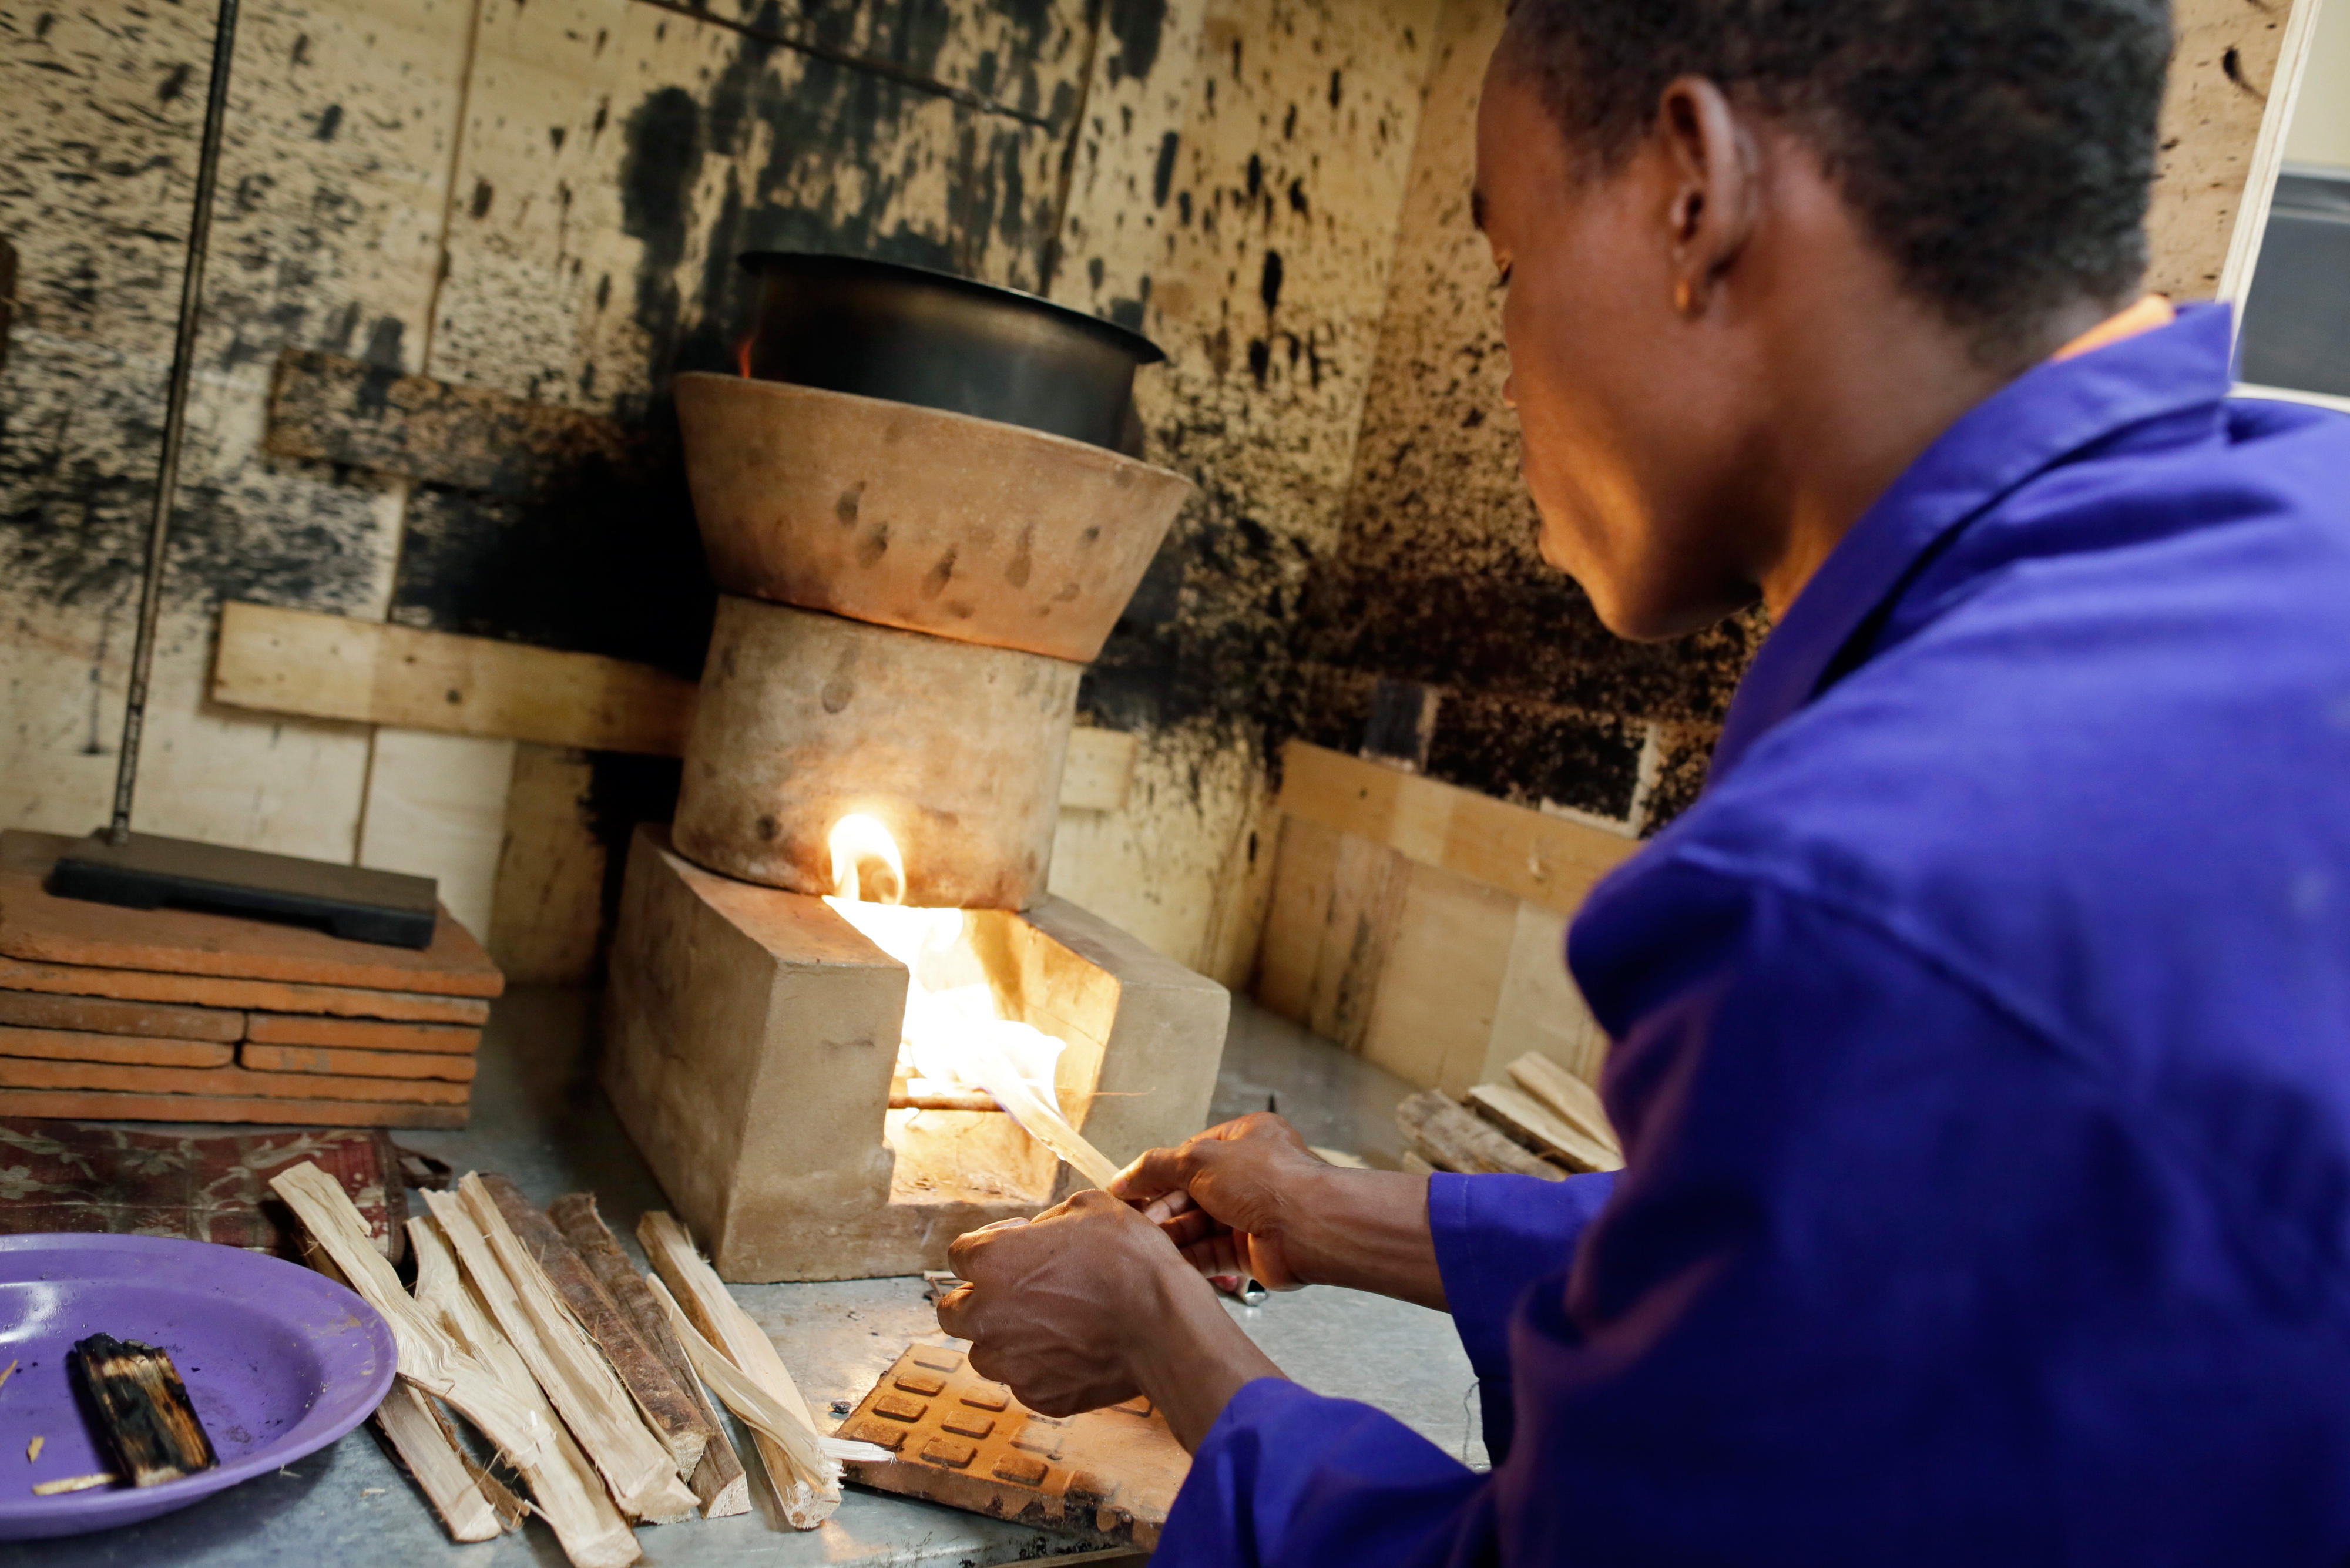 Researcher at the Centre of Research in Energy and Energy Conservation at Makerere University in Kampala, Uganda. Here, researchers are testing the energy efficiency of wood-burning stoves.